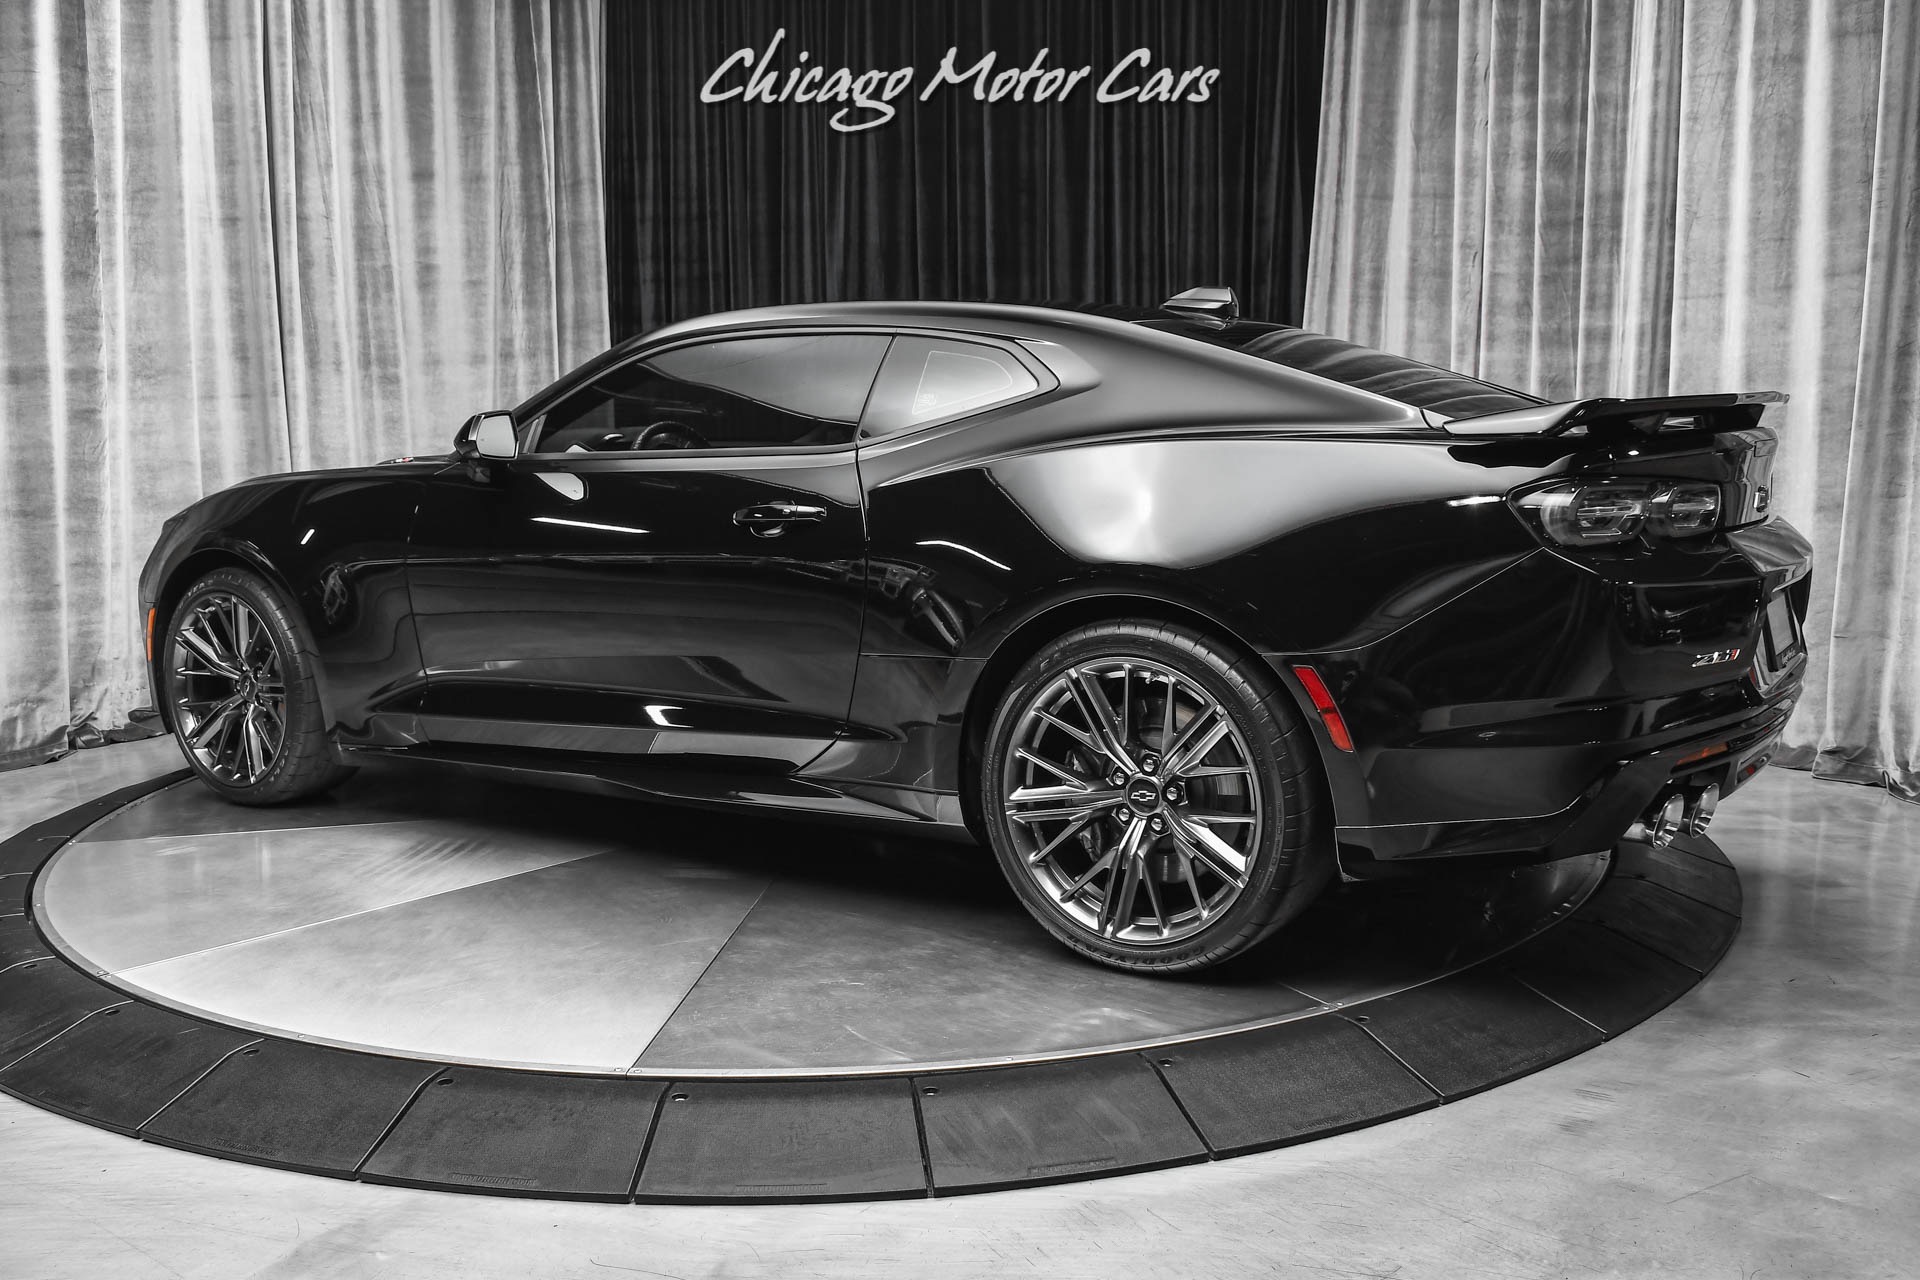 Used 2022 Chevrolet Camaro ZL1 Coupe Black/ Jet Black ONLY 1,180 Miles!  10-Speed! For Sale (Special Pricing) | Chicago Motor Cars Stock #19215